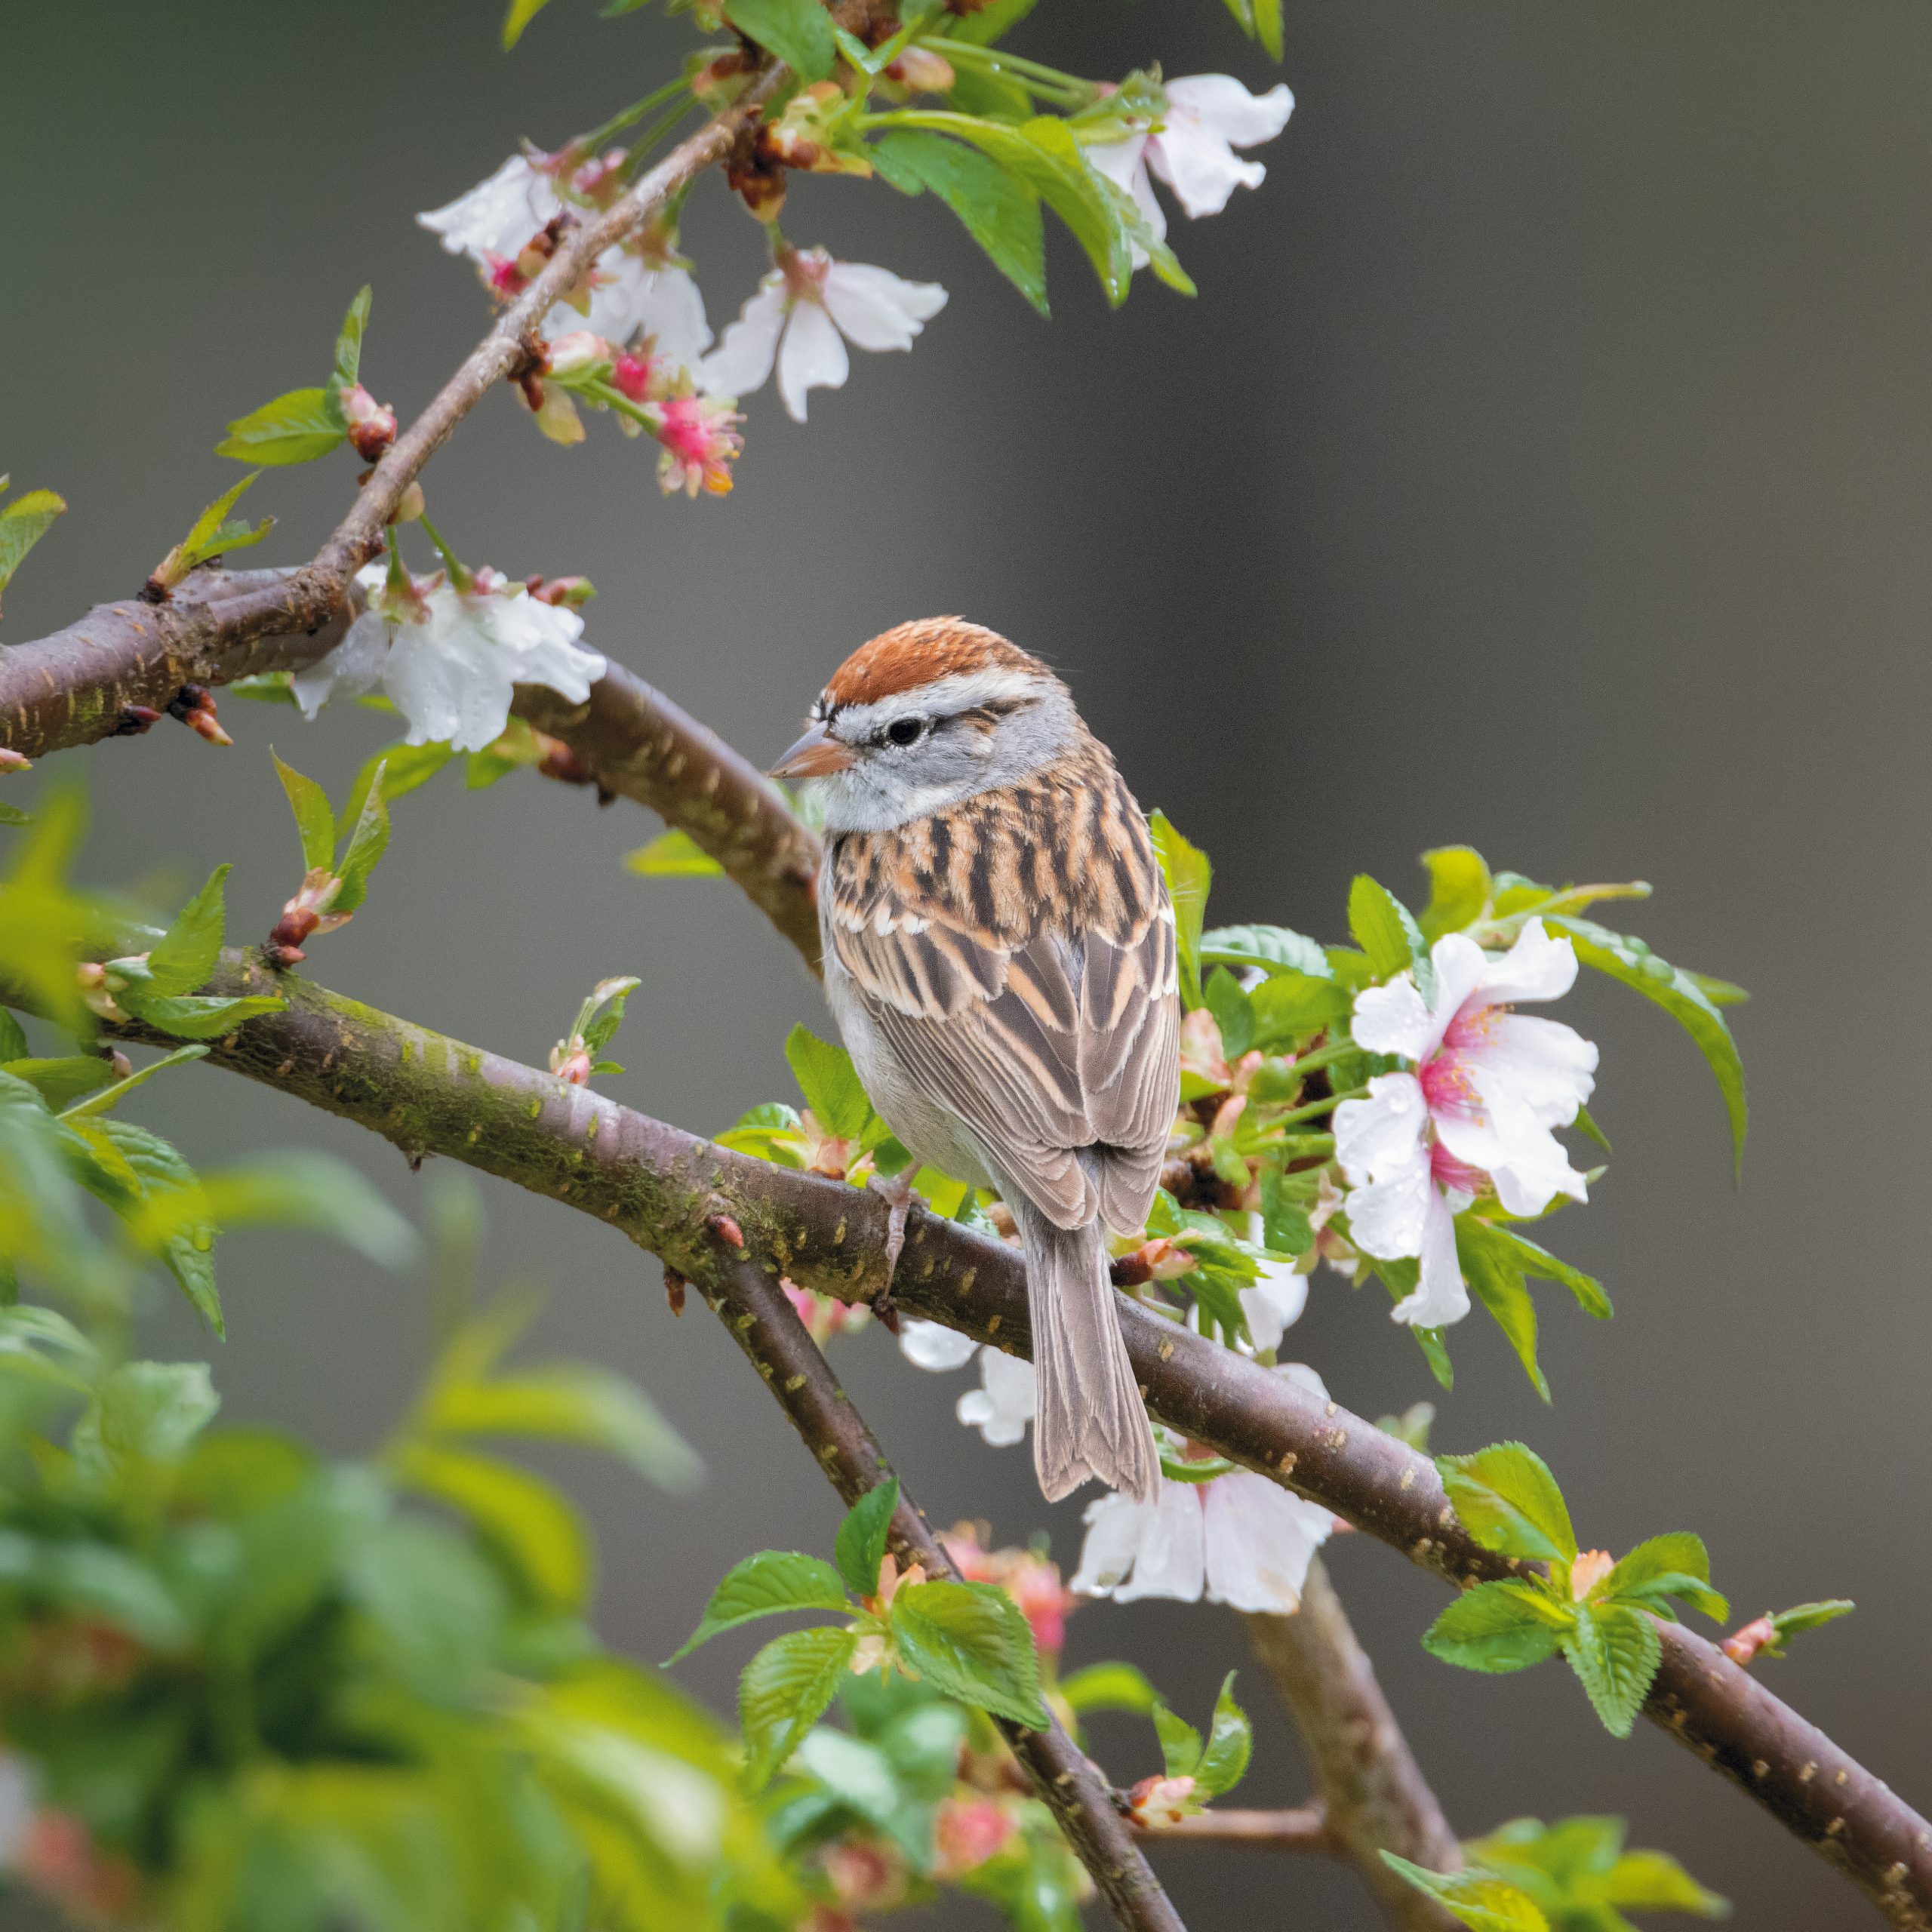 The Chipping Sparrow is usually found in open woodlands and scrubby areas, and it is widespread throughout most of North America.